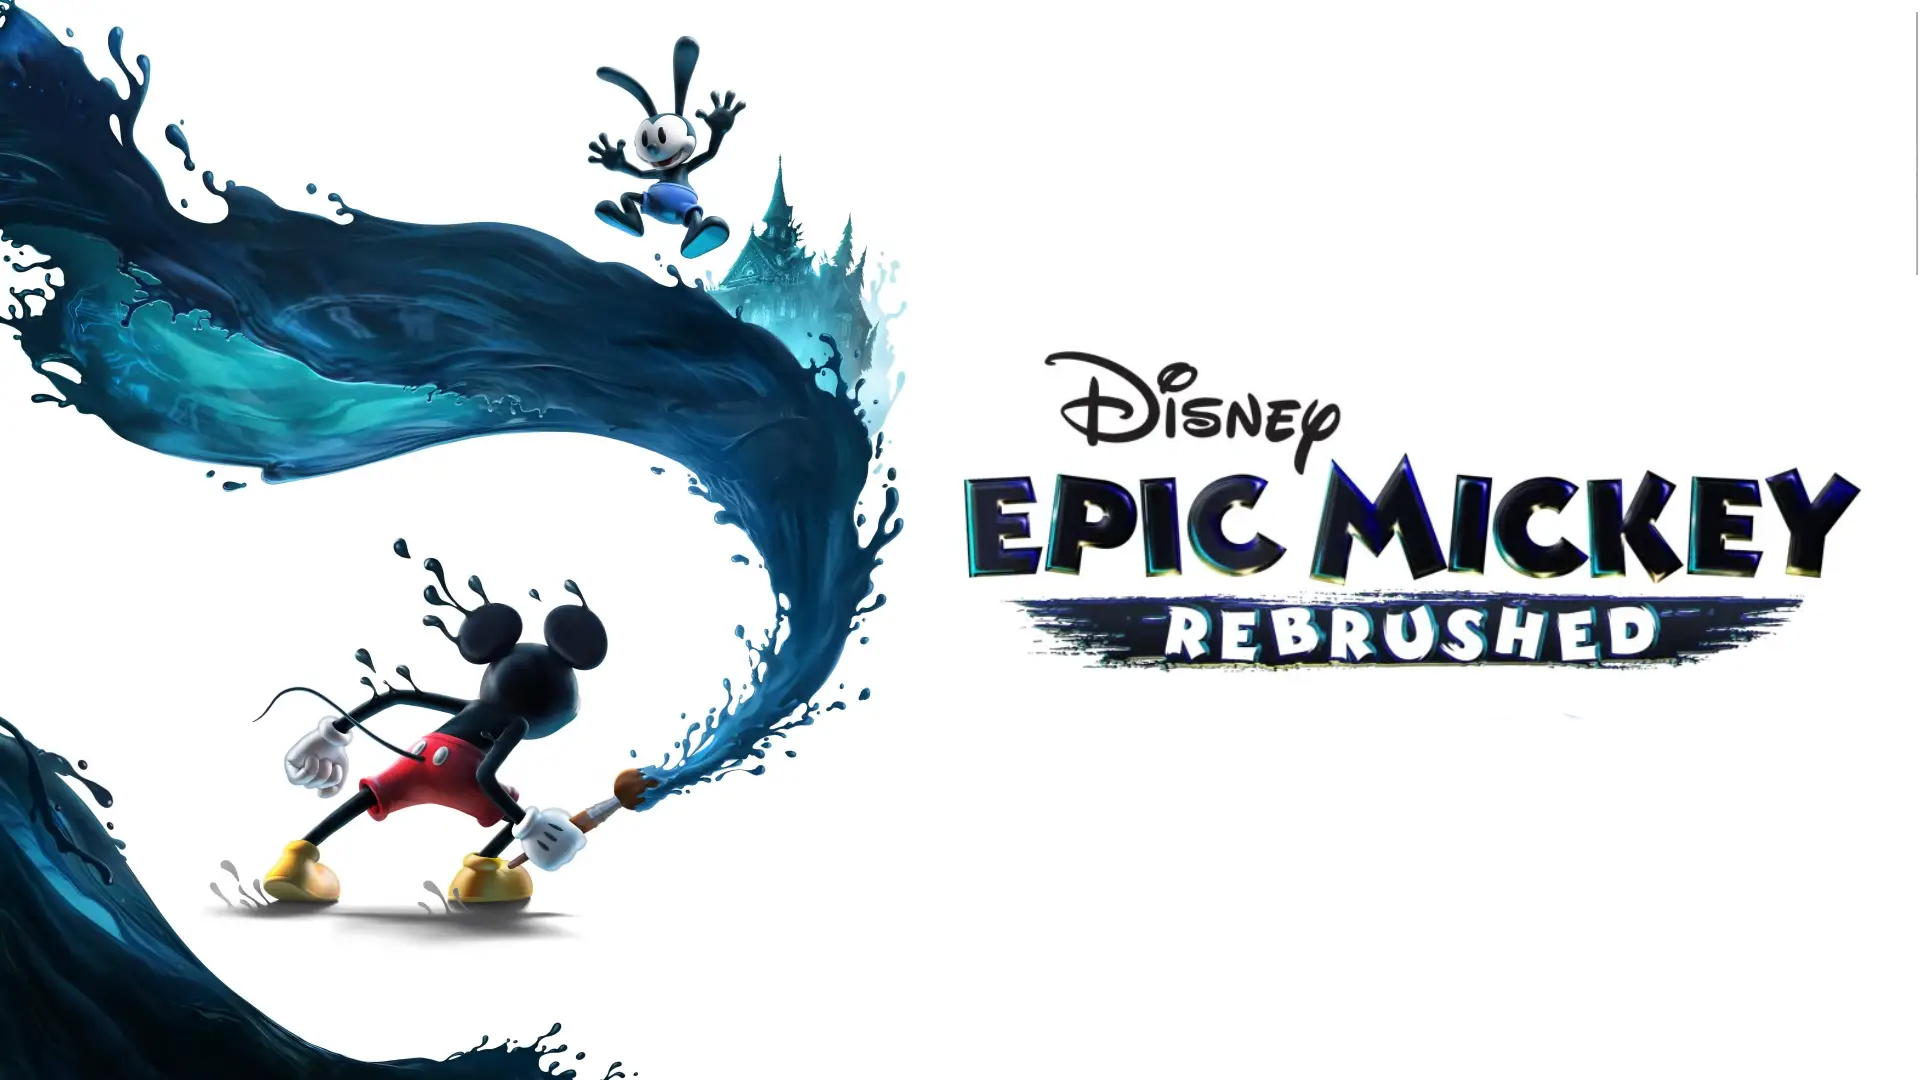 Epic Mickey “Rebrushed” Remake Coming To Switch